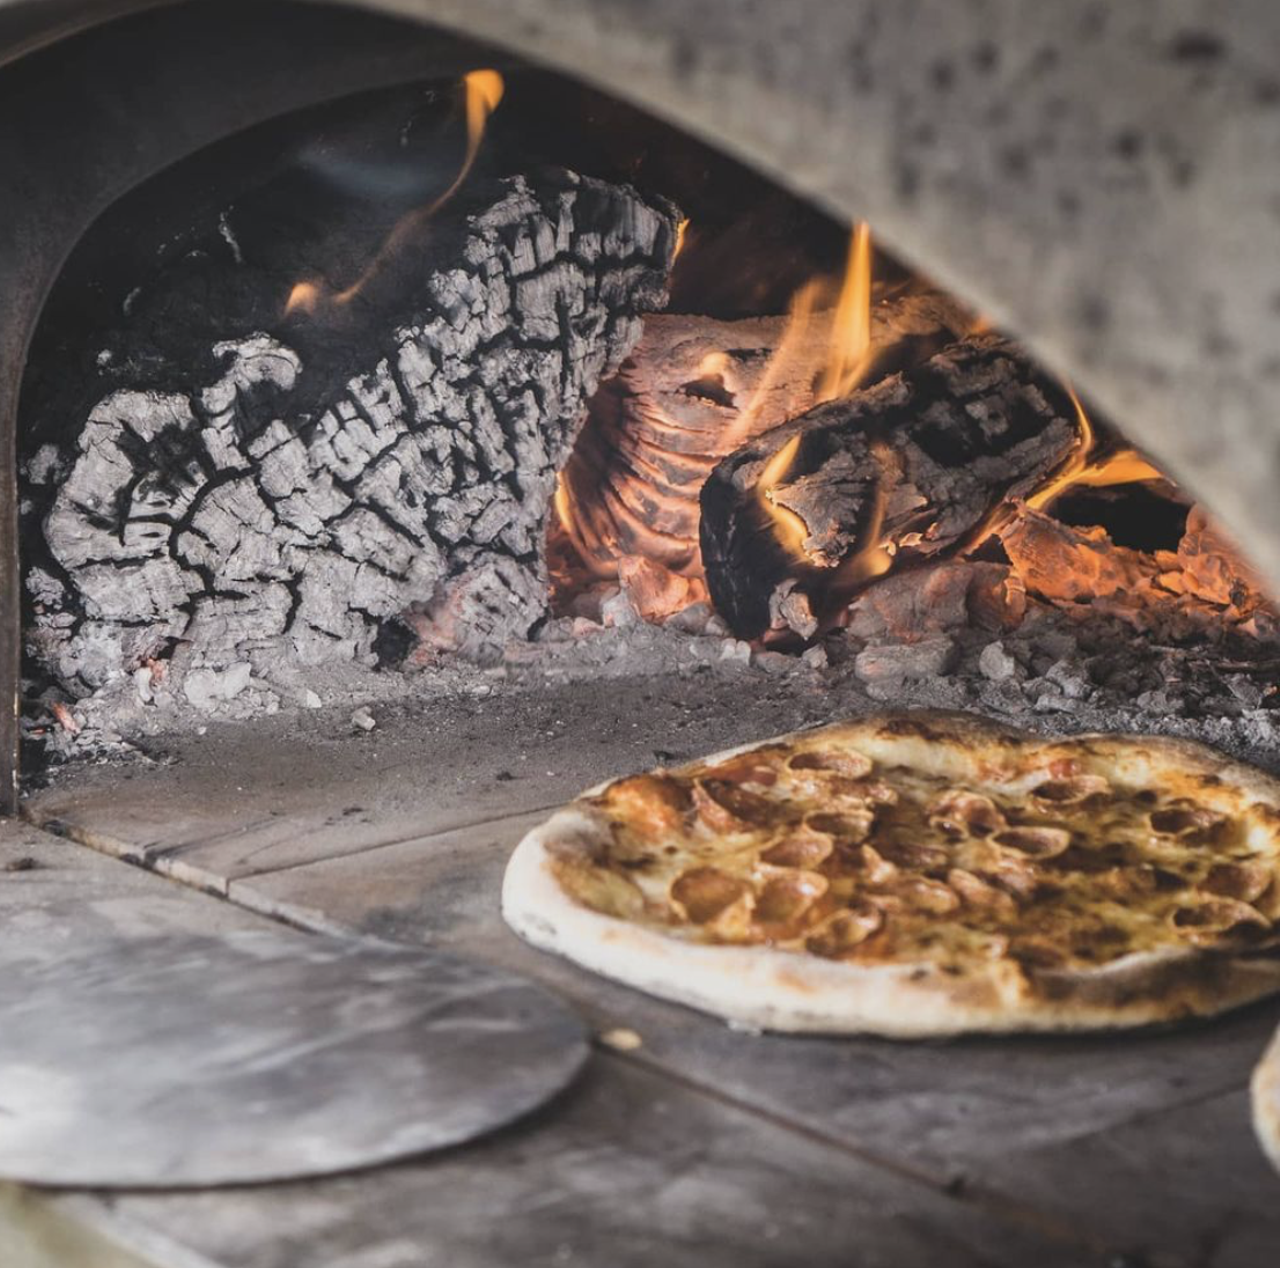 Stone Bros. Mobile Pizzas
Location Varies, stonebrostx.com
This pizza trailer taps into over 30 years of pizza-making expertise to offer rustic-style pies made in a custom wood-burning oven. 
Photo via Instagram / stonebrostx